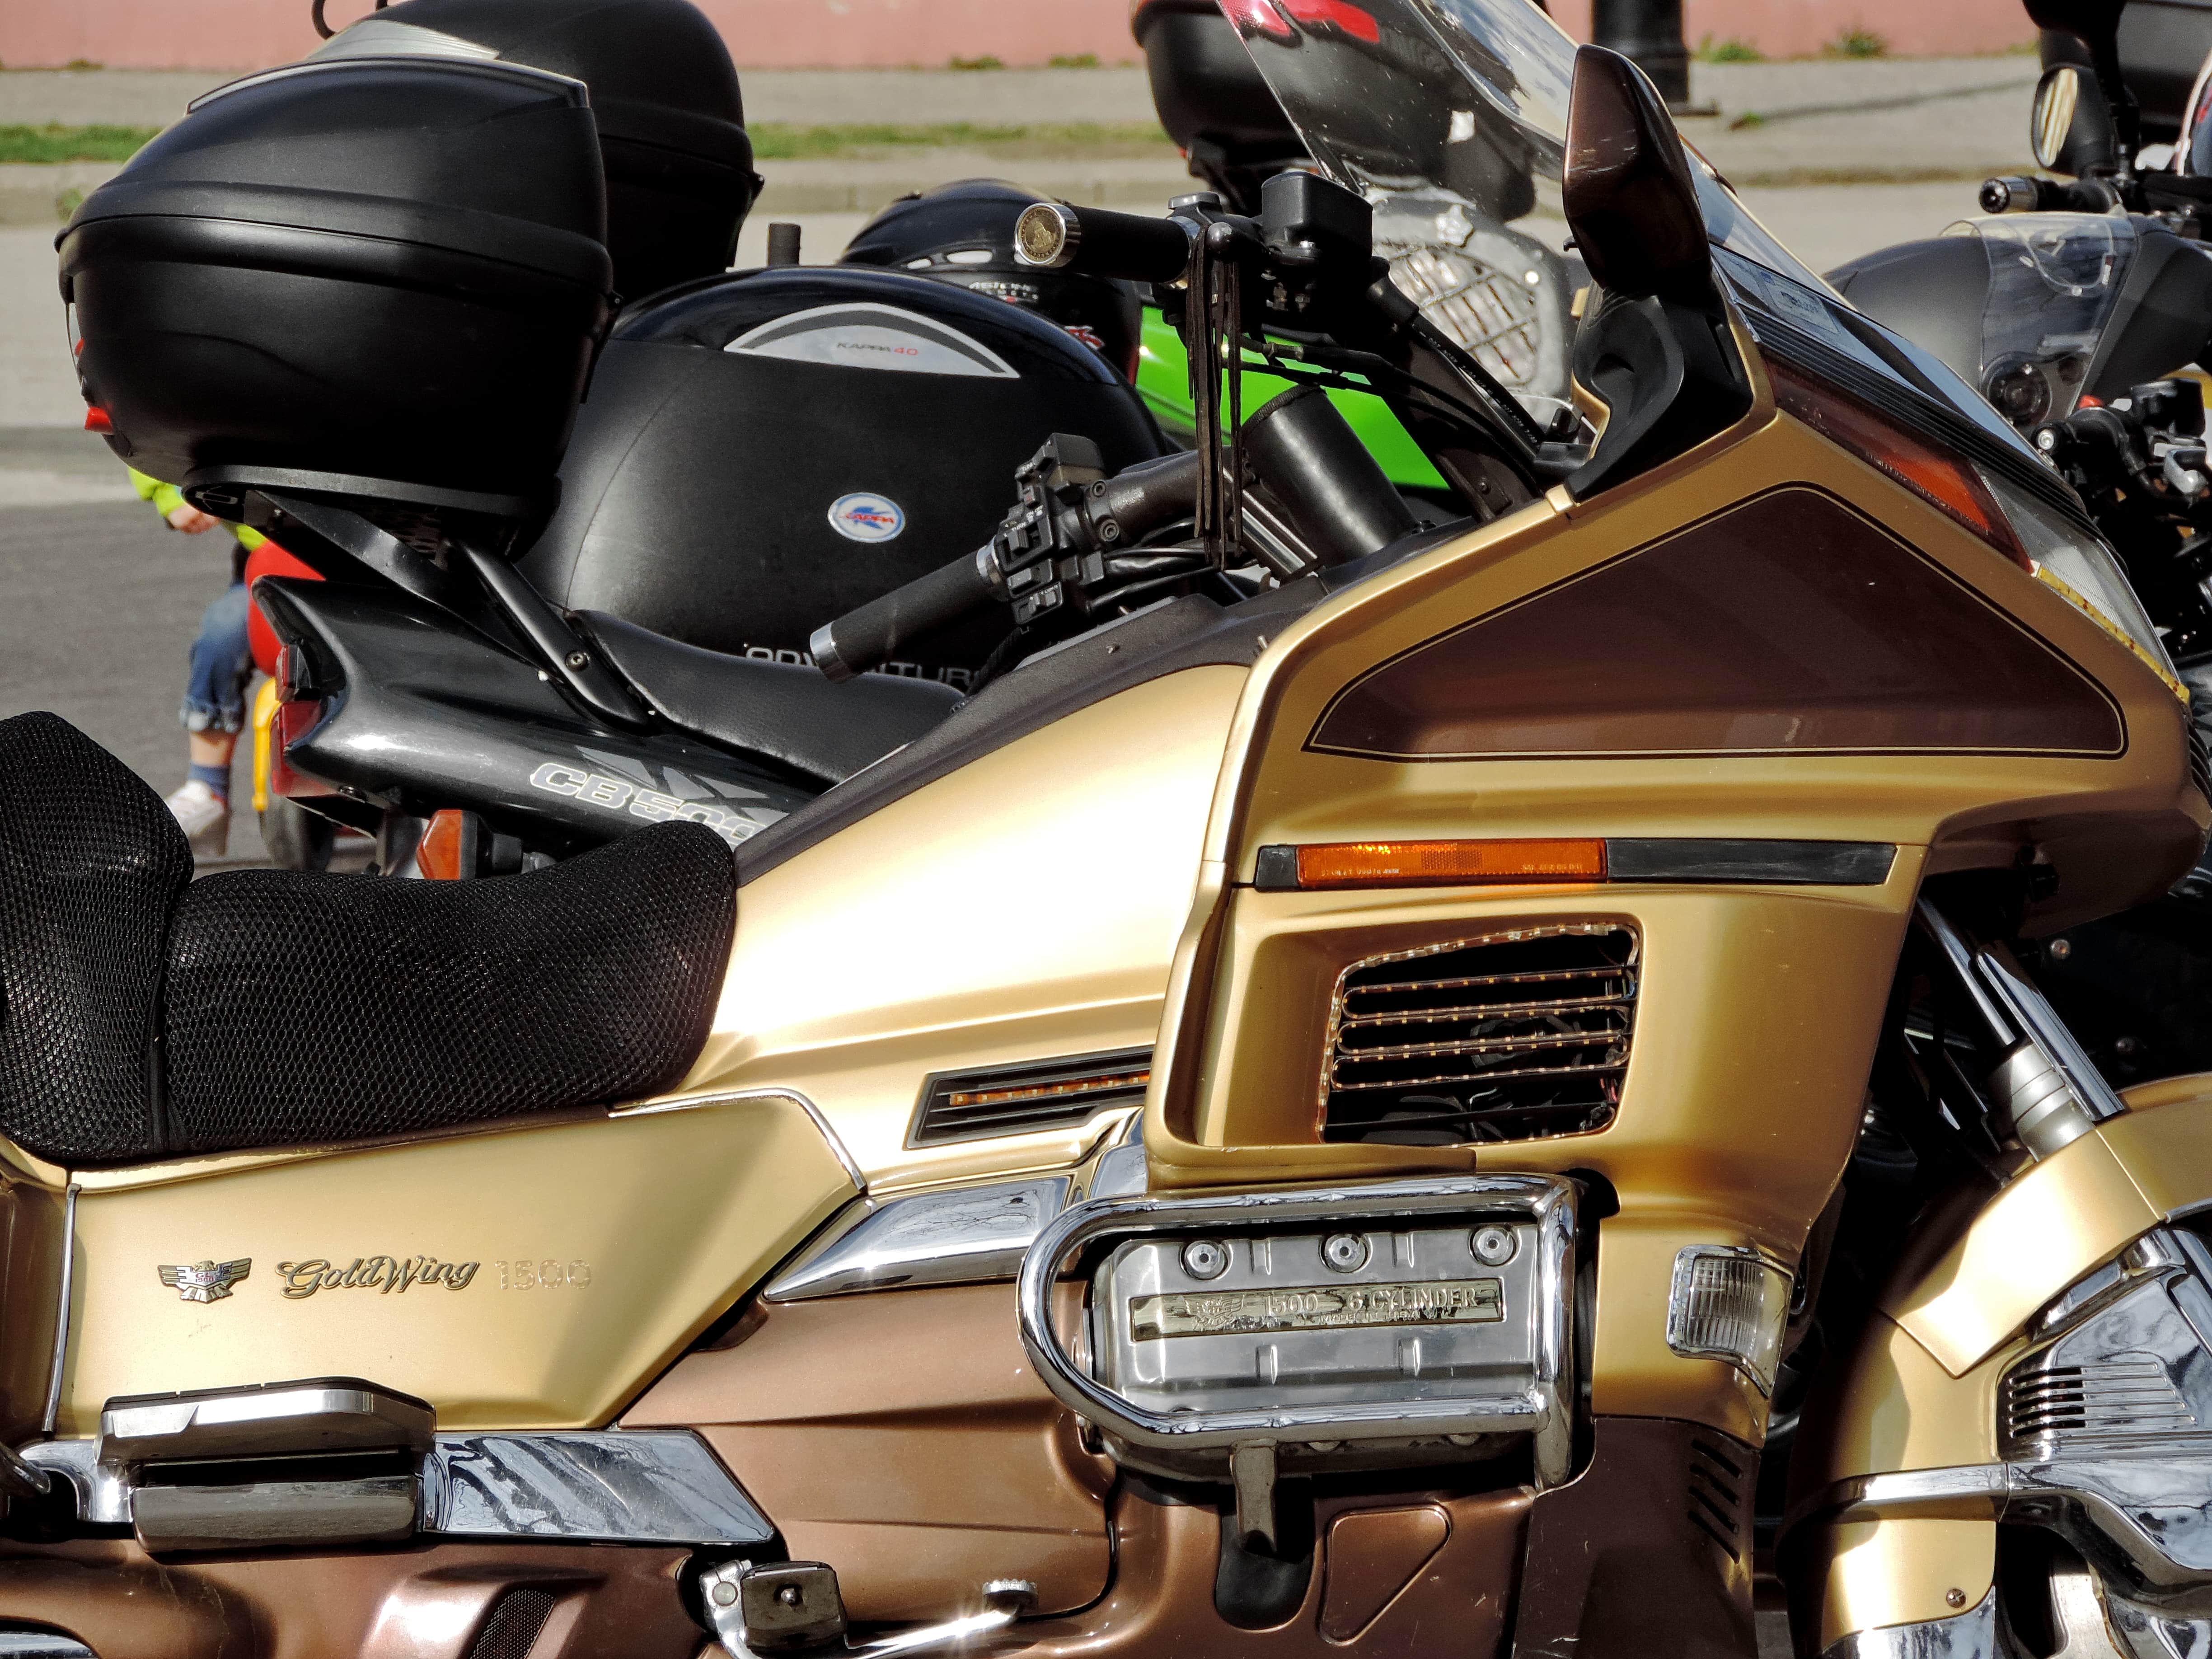 Uncompromising Comfort: Ultimate Riding Experience for Discerning Riders